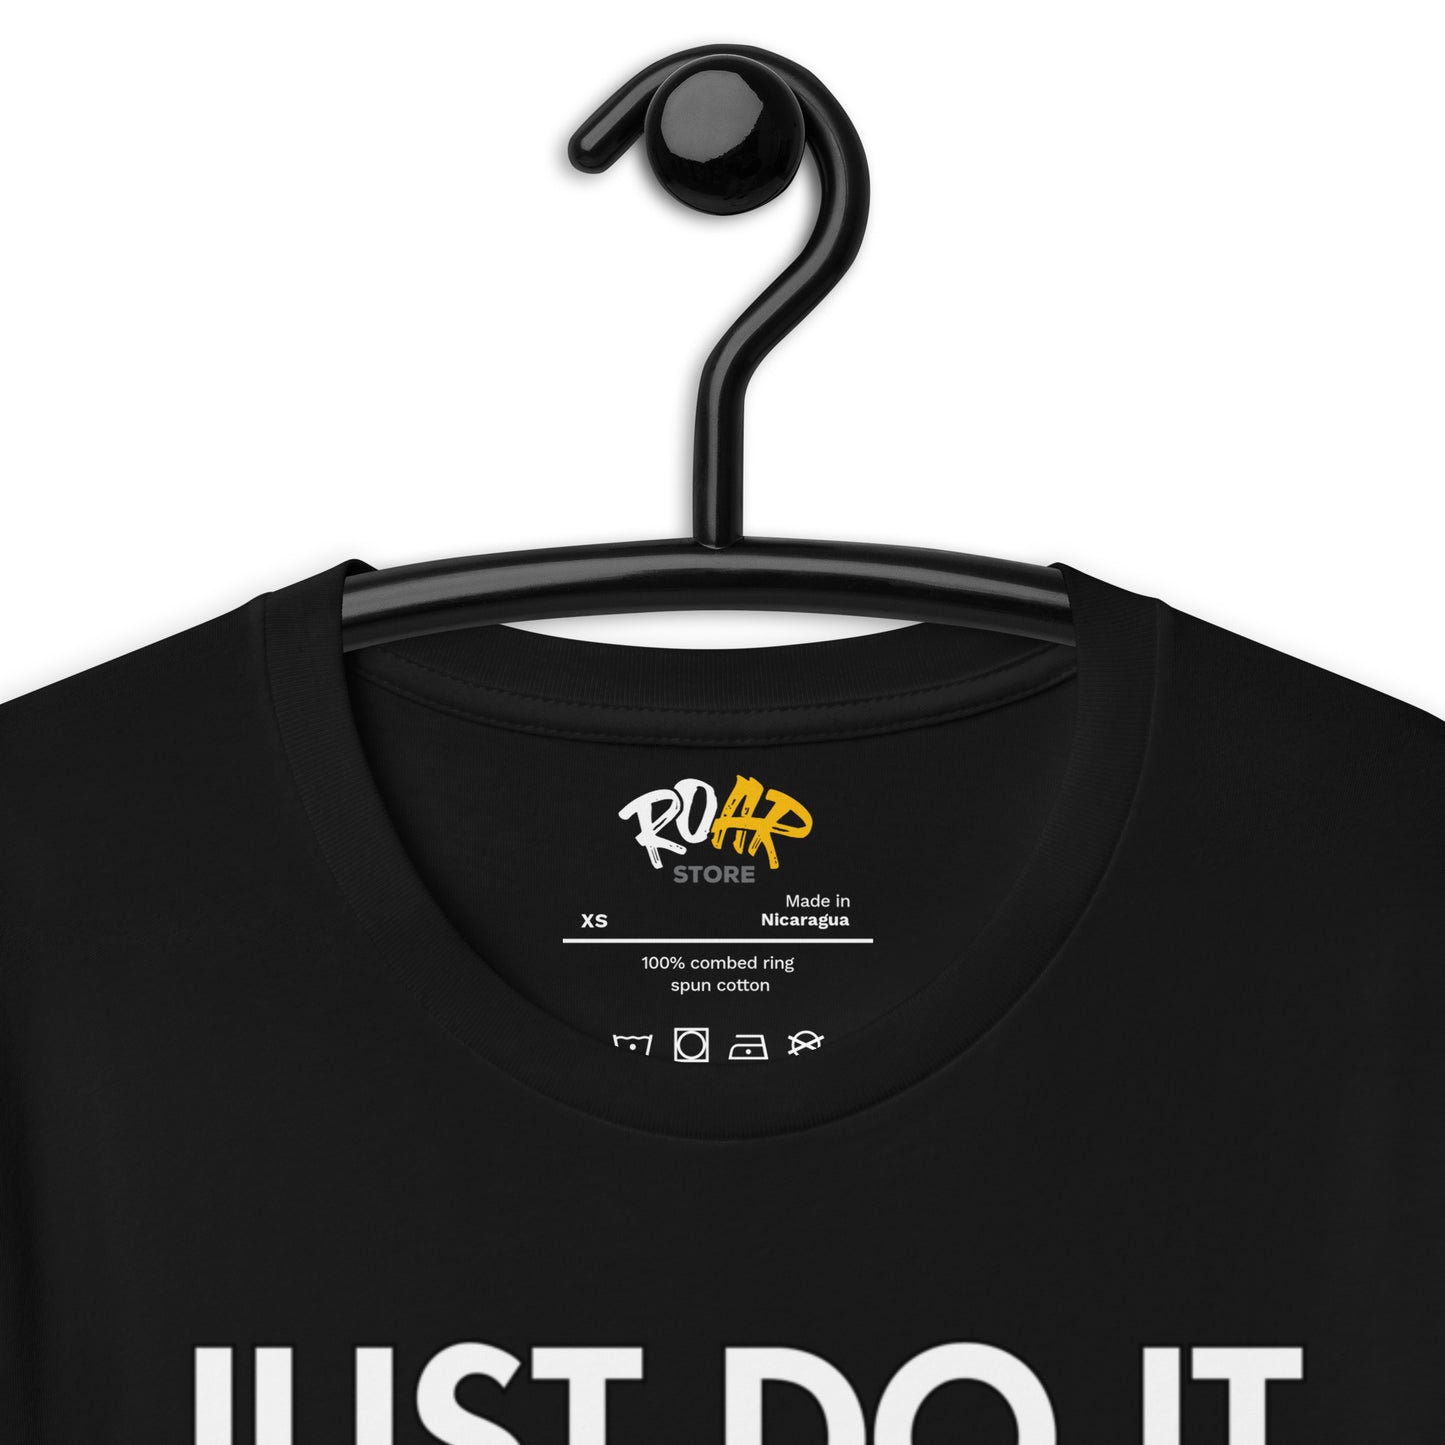 Just Do It Later - Black